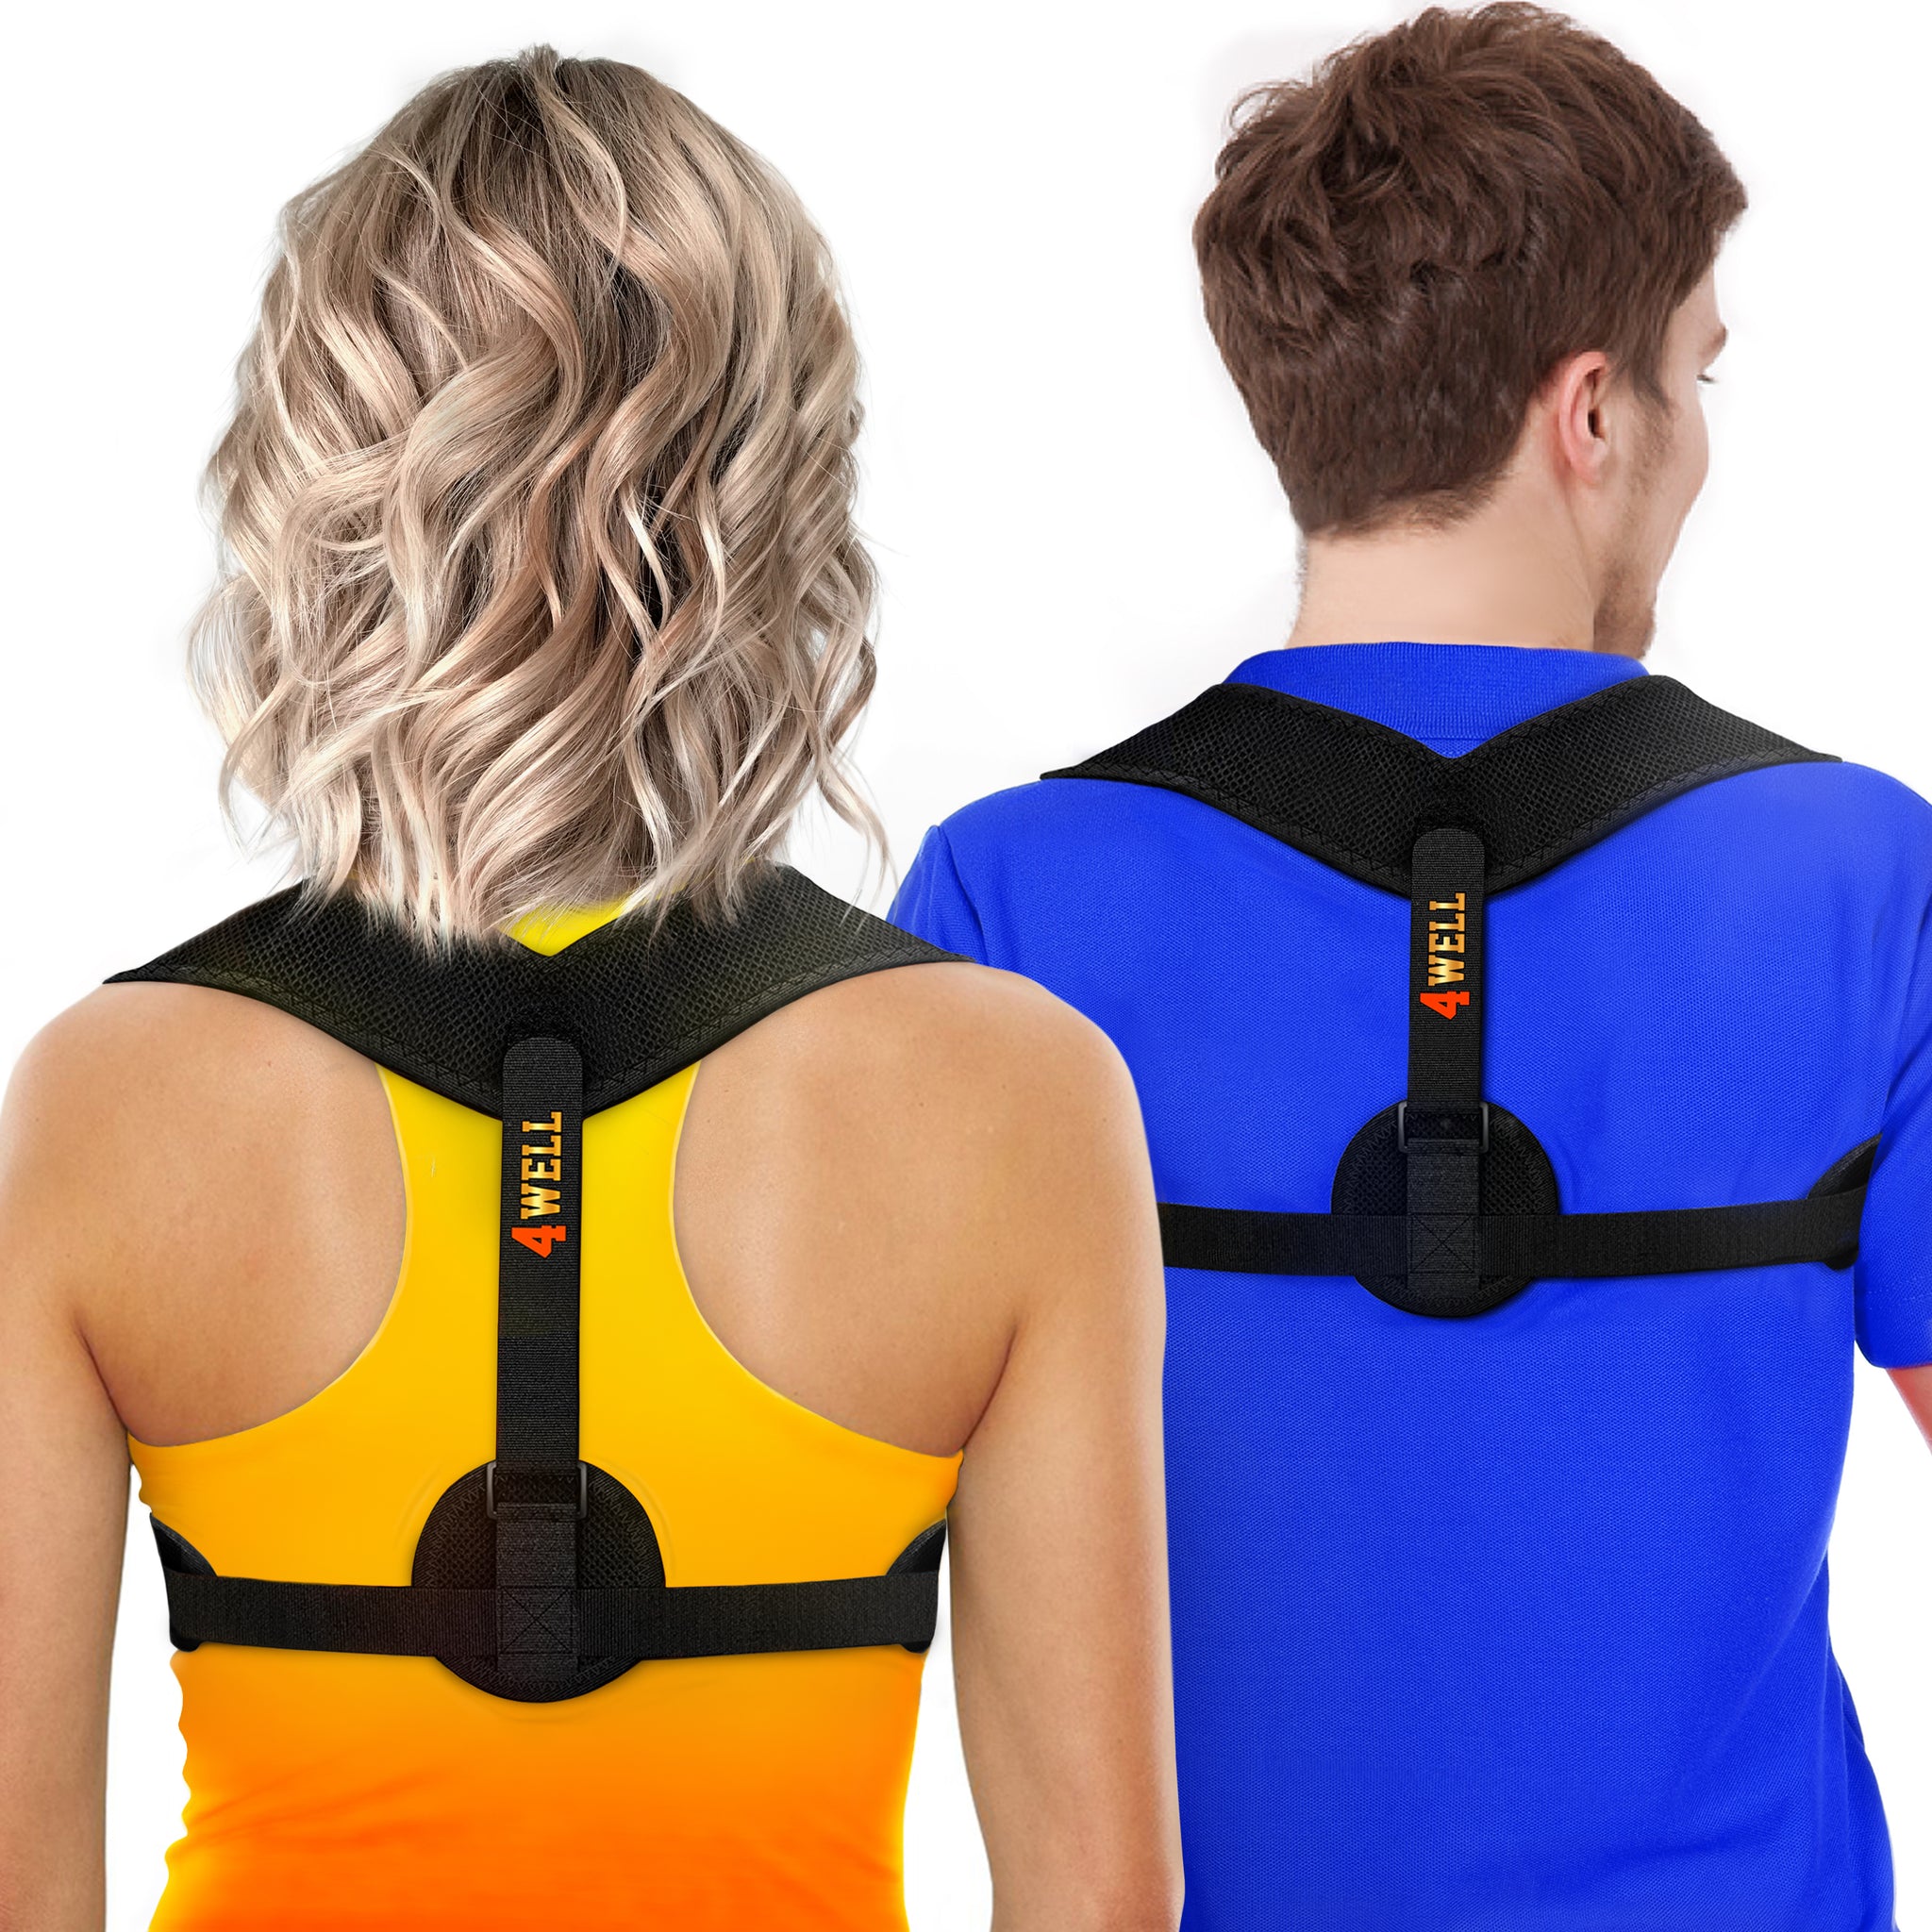 4WELL Posture Corrector For Women Men Effective and Comfortable Adjustable Posture  Correct Brace Back Brace Posture Brace Clavicle Support Brace Posture  Support Upper Back Pain Relief